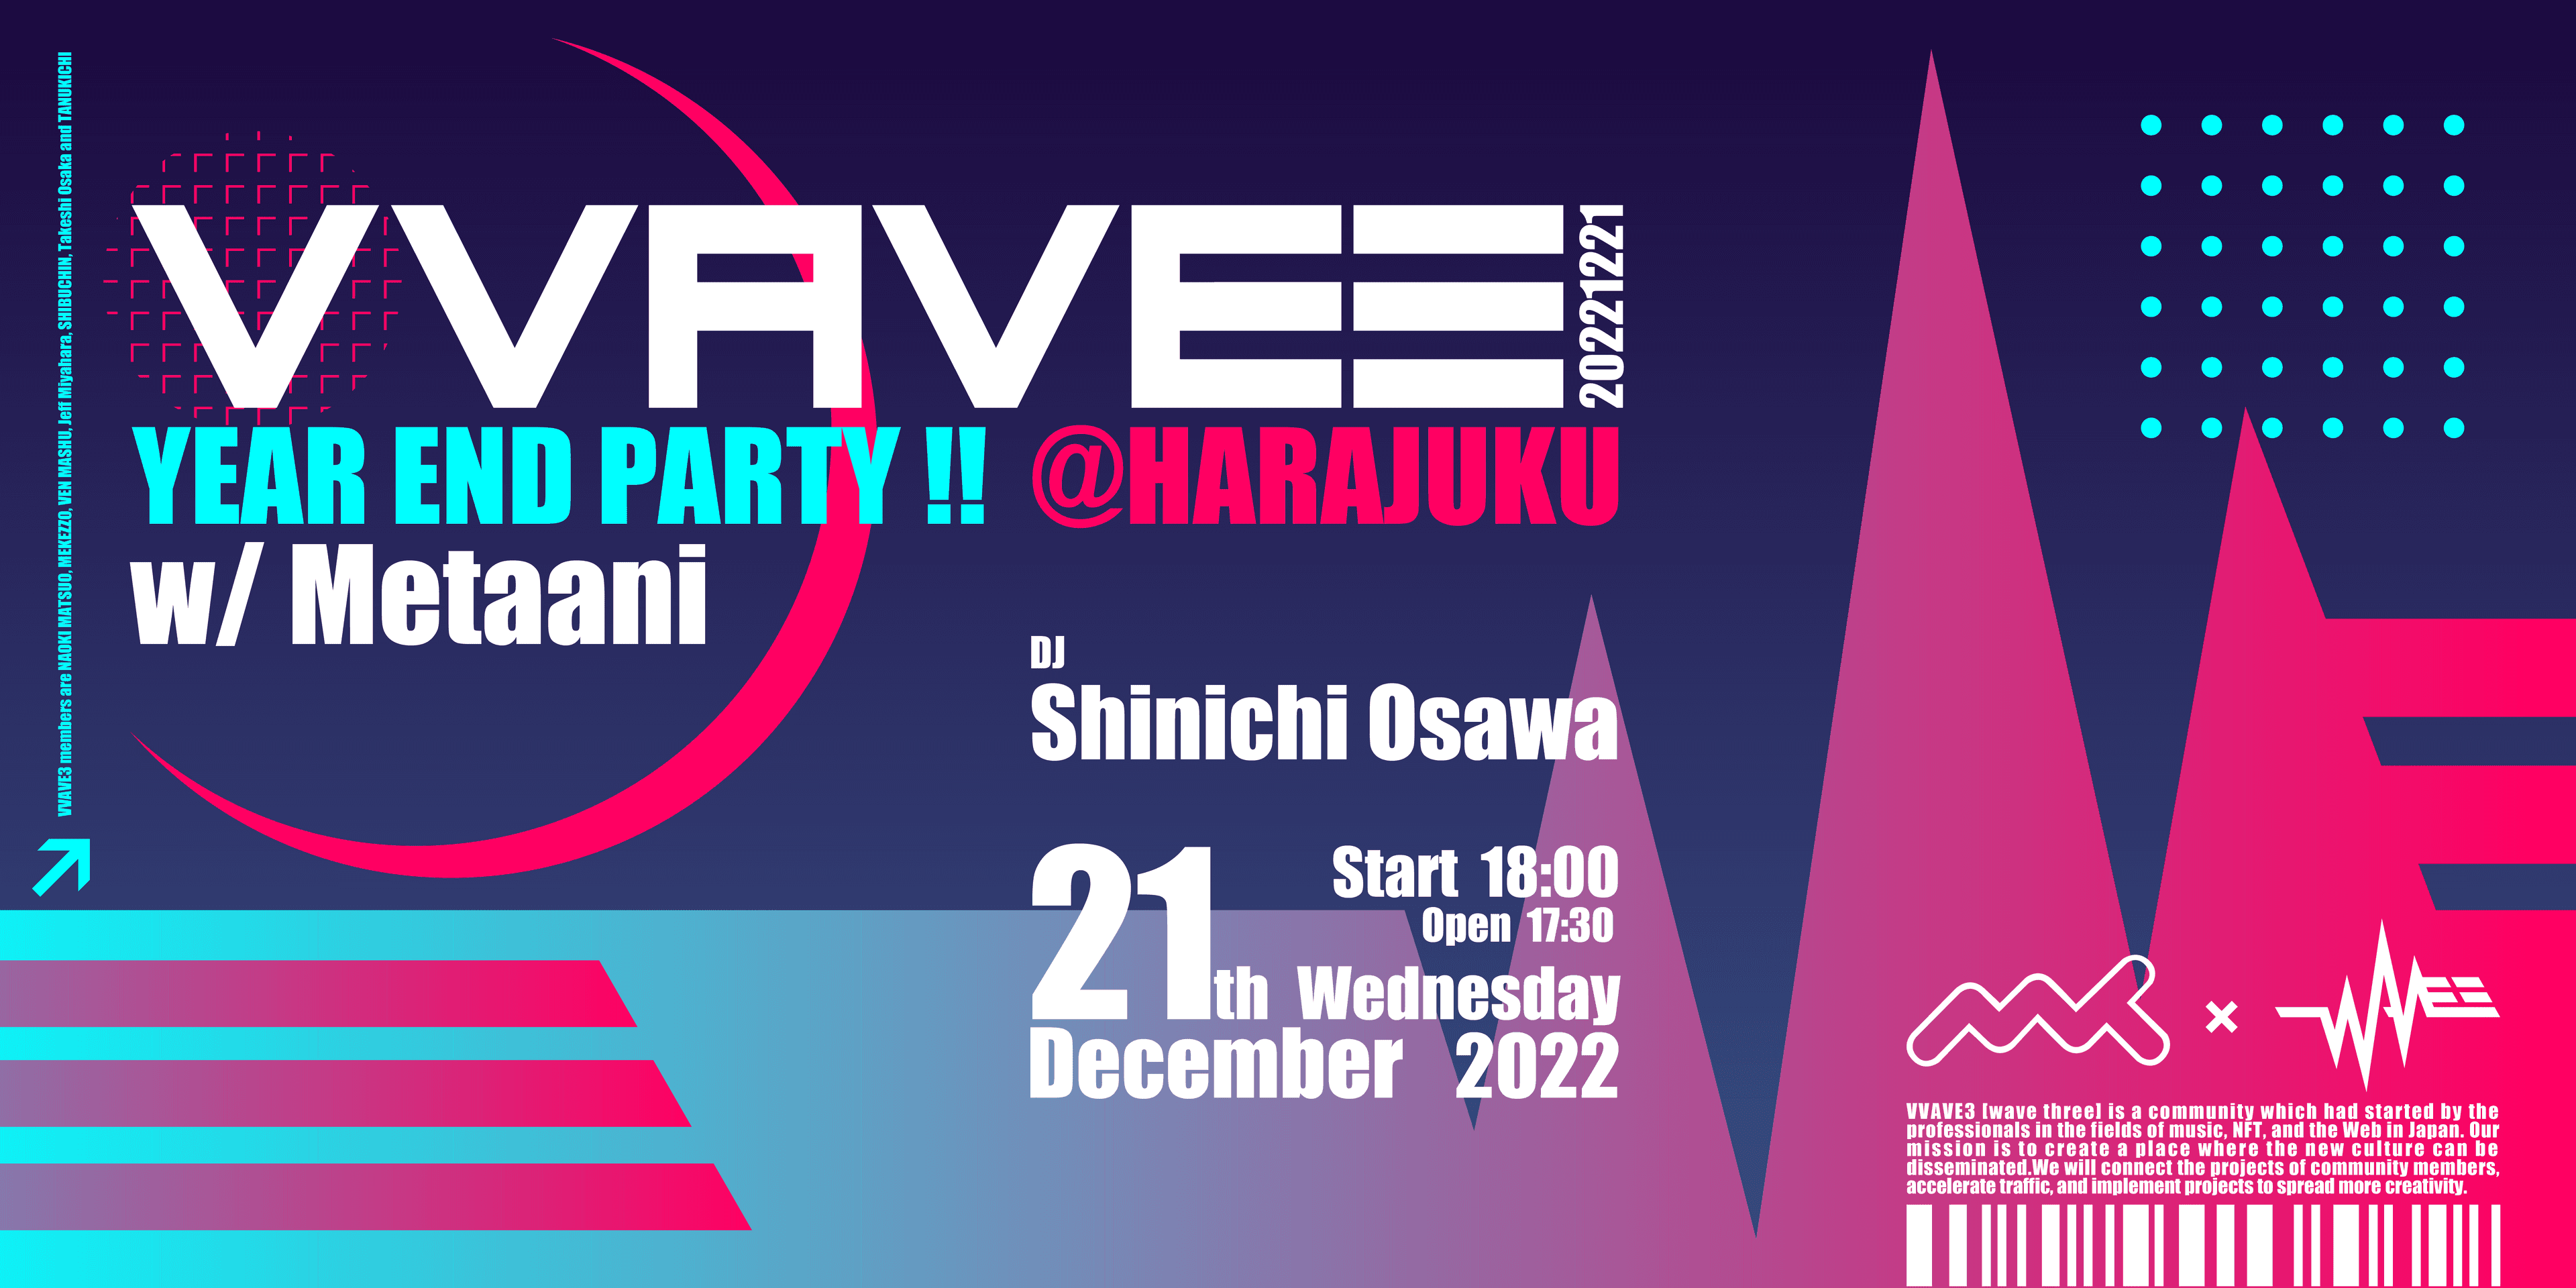 VVAVE3 YEAR END PARTY